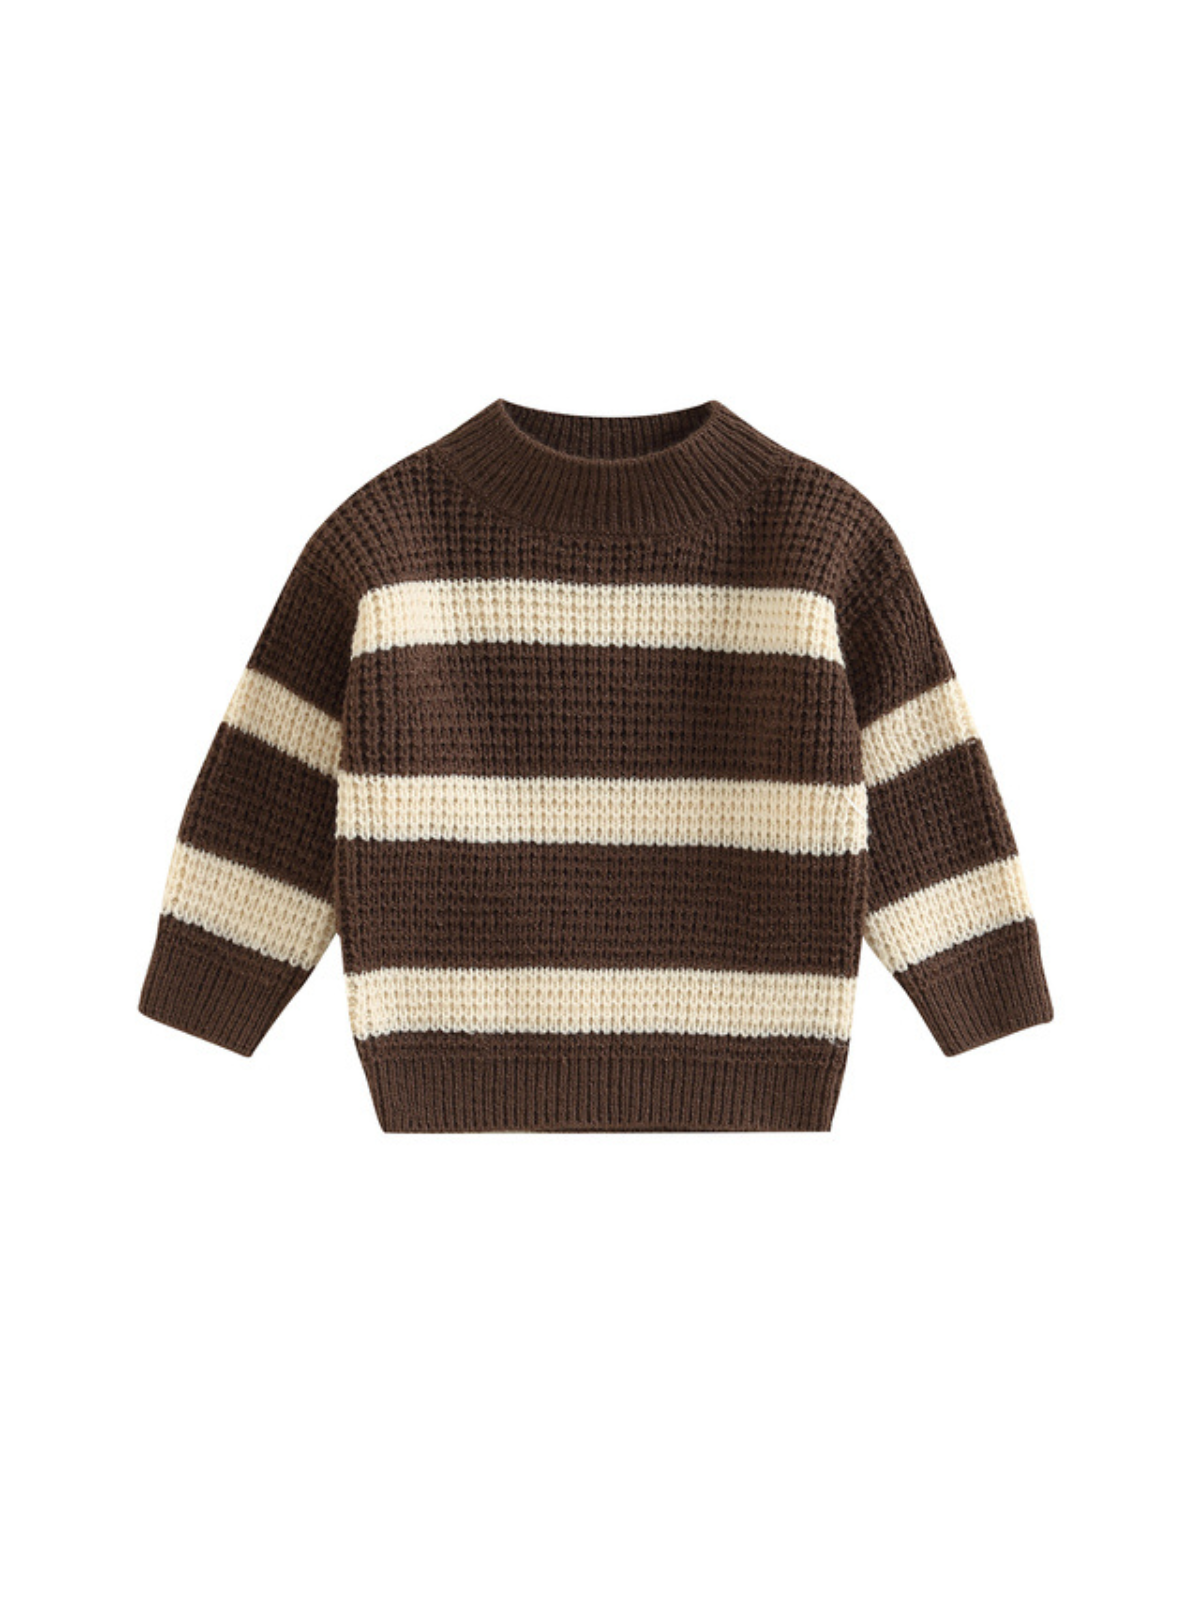 Girls Clothing Sale | Toddler Striped Waffle Sweater | Mia Belle Girls